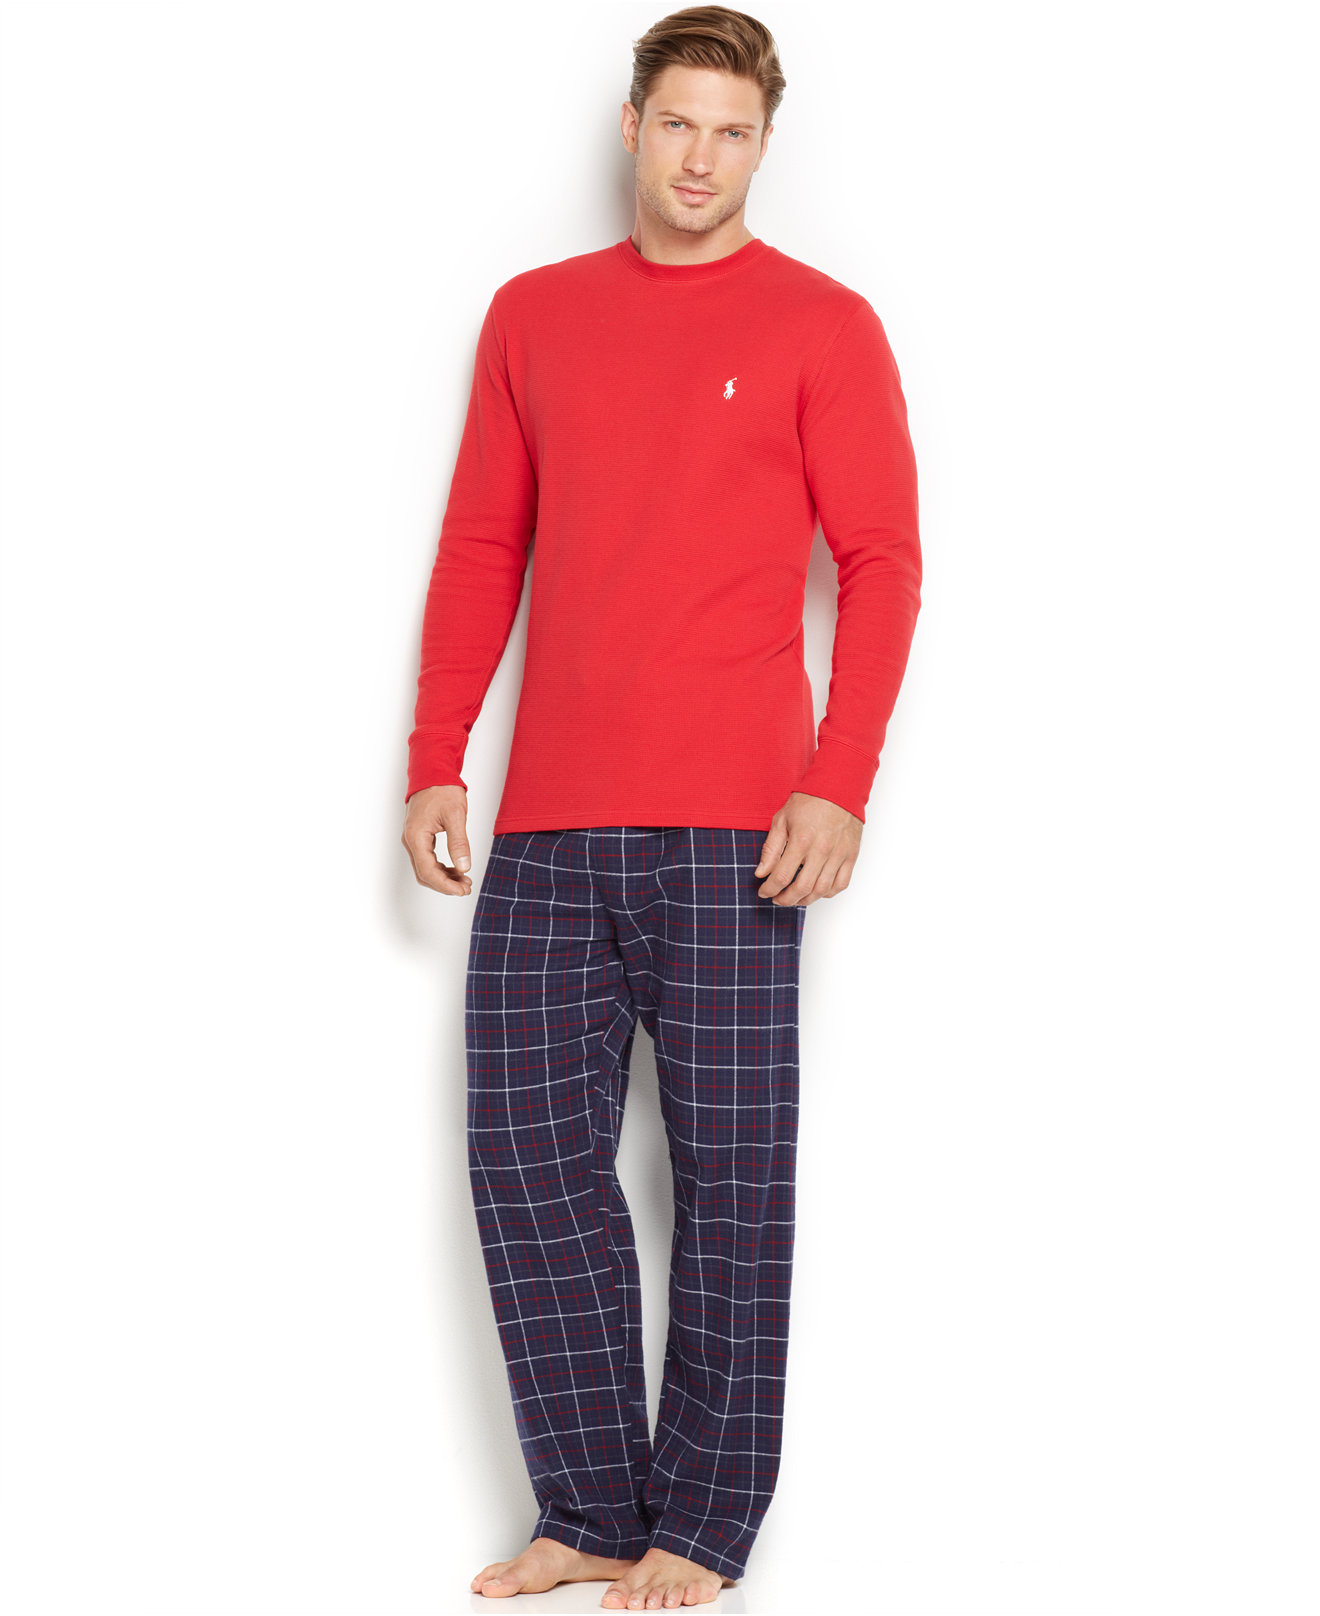 Polo Ralph Lauren Men's Loungewear, Thermal & Flannel Tops and ...